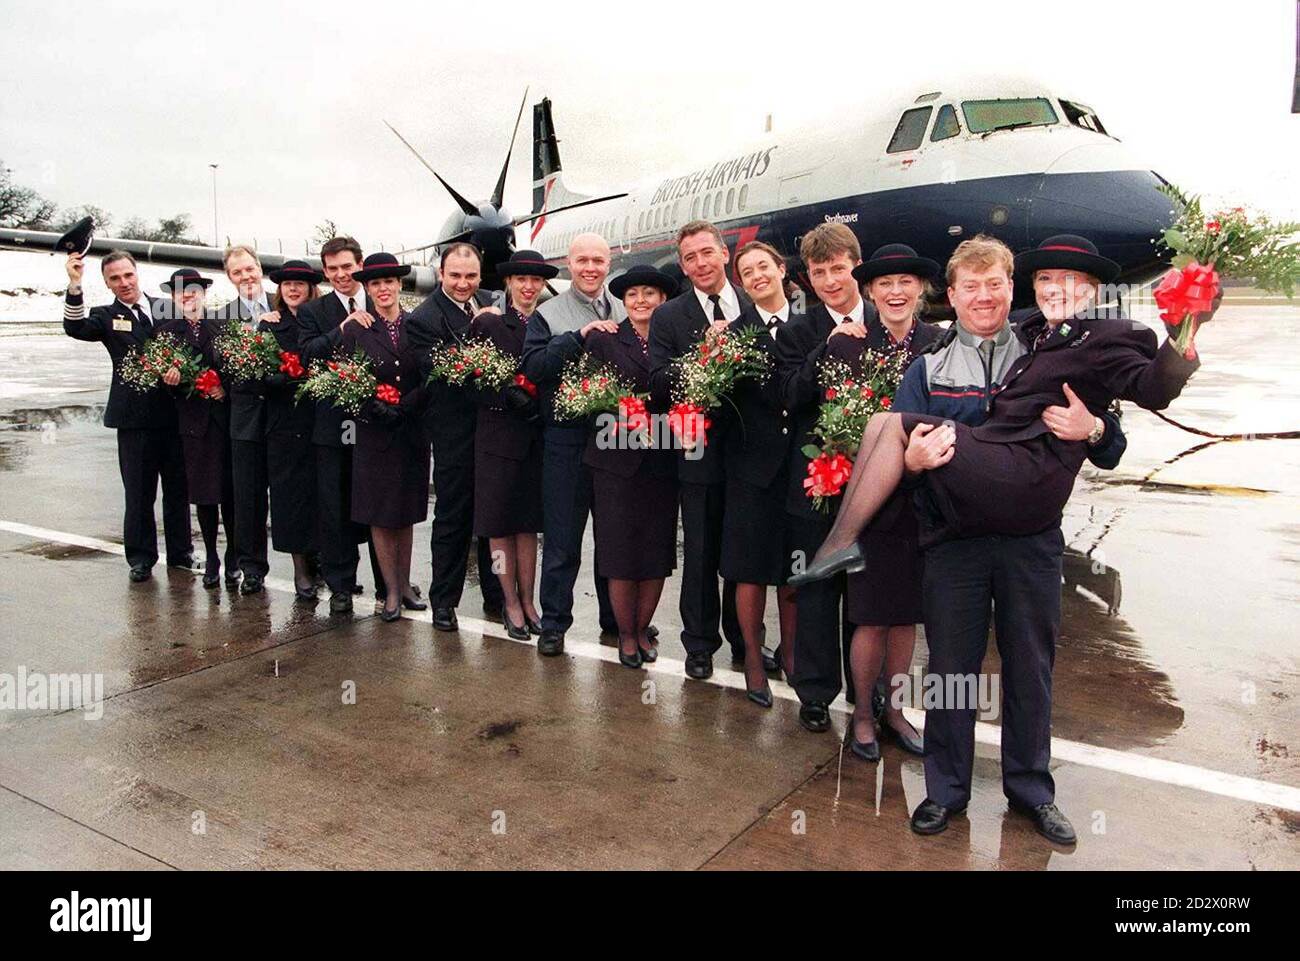 LOVE IS IN THE AIR.....British Airways couples (l-r) Captain Phil Egging with stewardess wife Linda, John and Deborah Findaly, Jonathon and Sheryl Moore, Joynal and Tracy Hague, Neil and Deborah Pritchard, Warren and Mandy Mountford, newest sweethearts John Coleman and his bride-to-be Tracy Adams, and Jason and Kay Hodgkisson. All of the British Airways couples are based at Birmingham International Airport, where 10 per cent of the 400-strong workforce are married to each other. PA. SEE PA STORY SOCIAL Valentine. Stock Photo